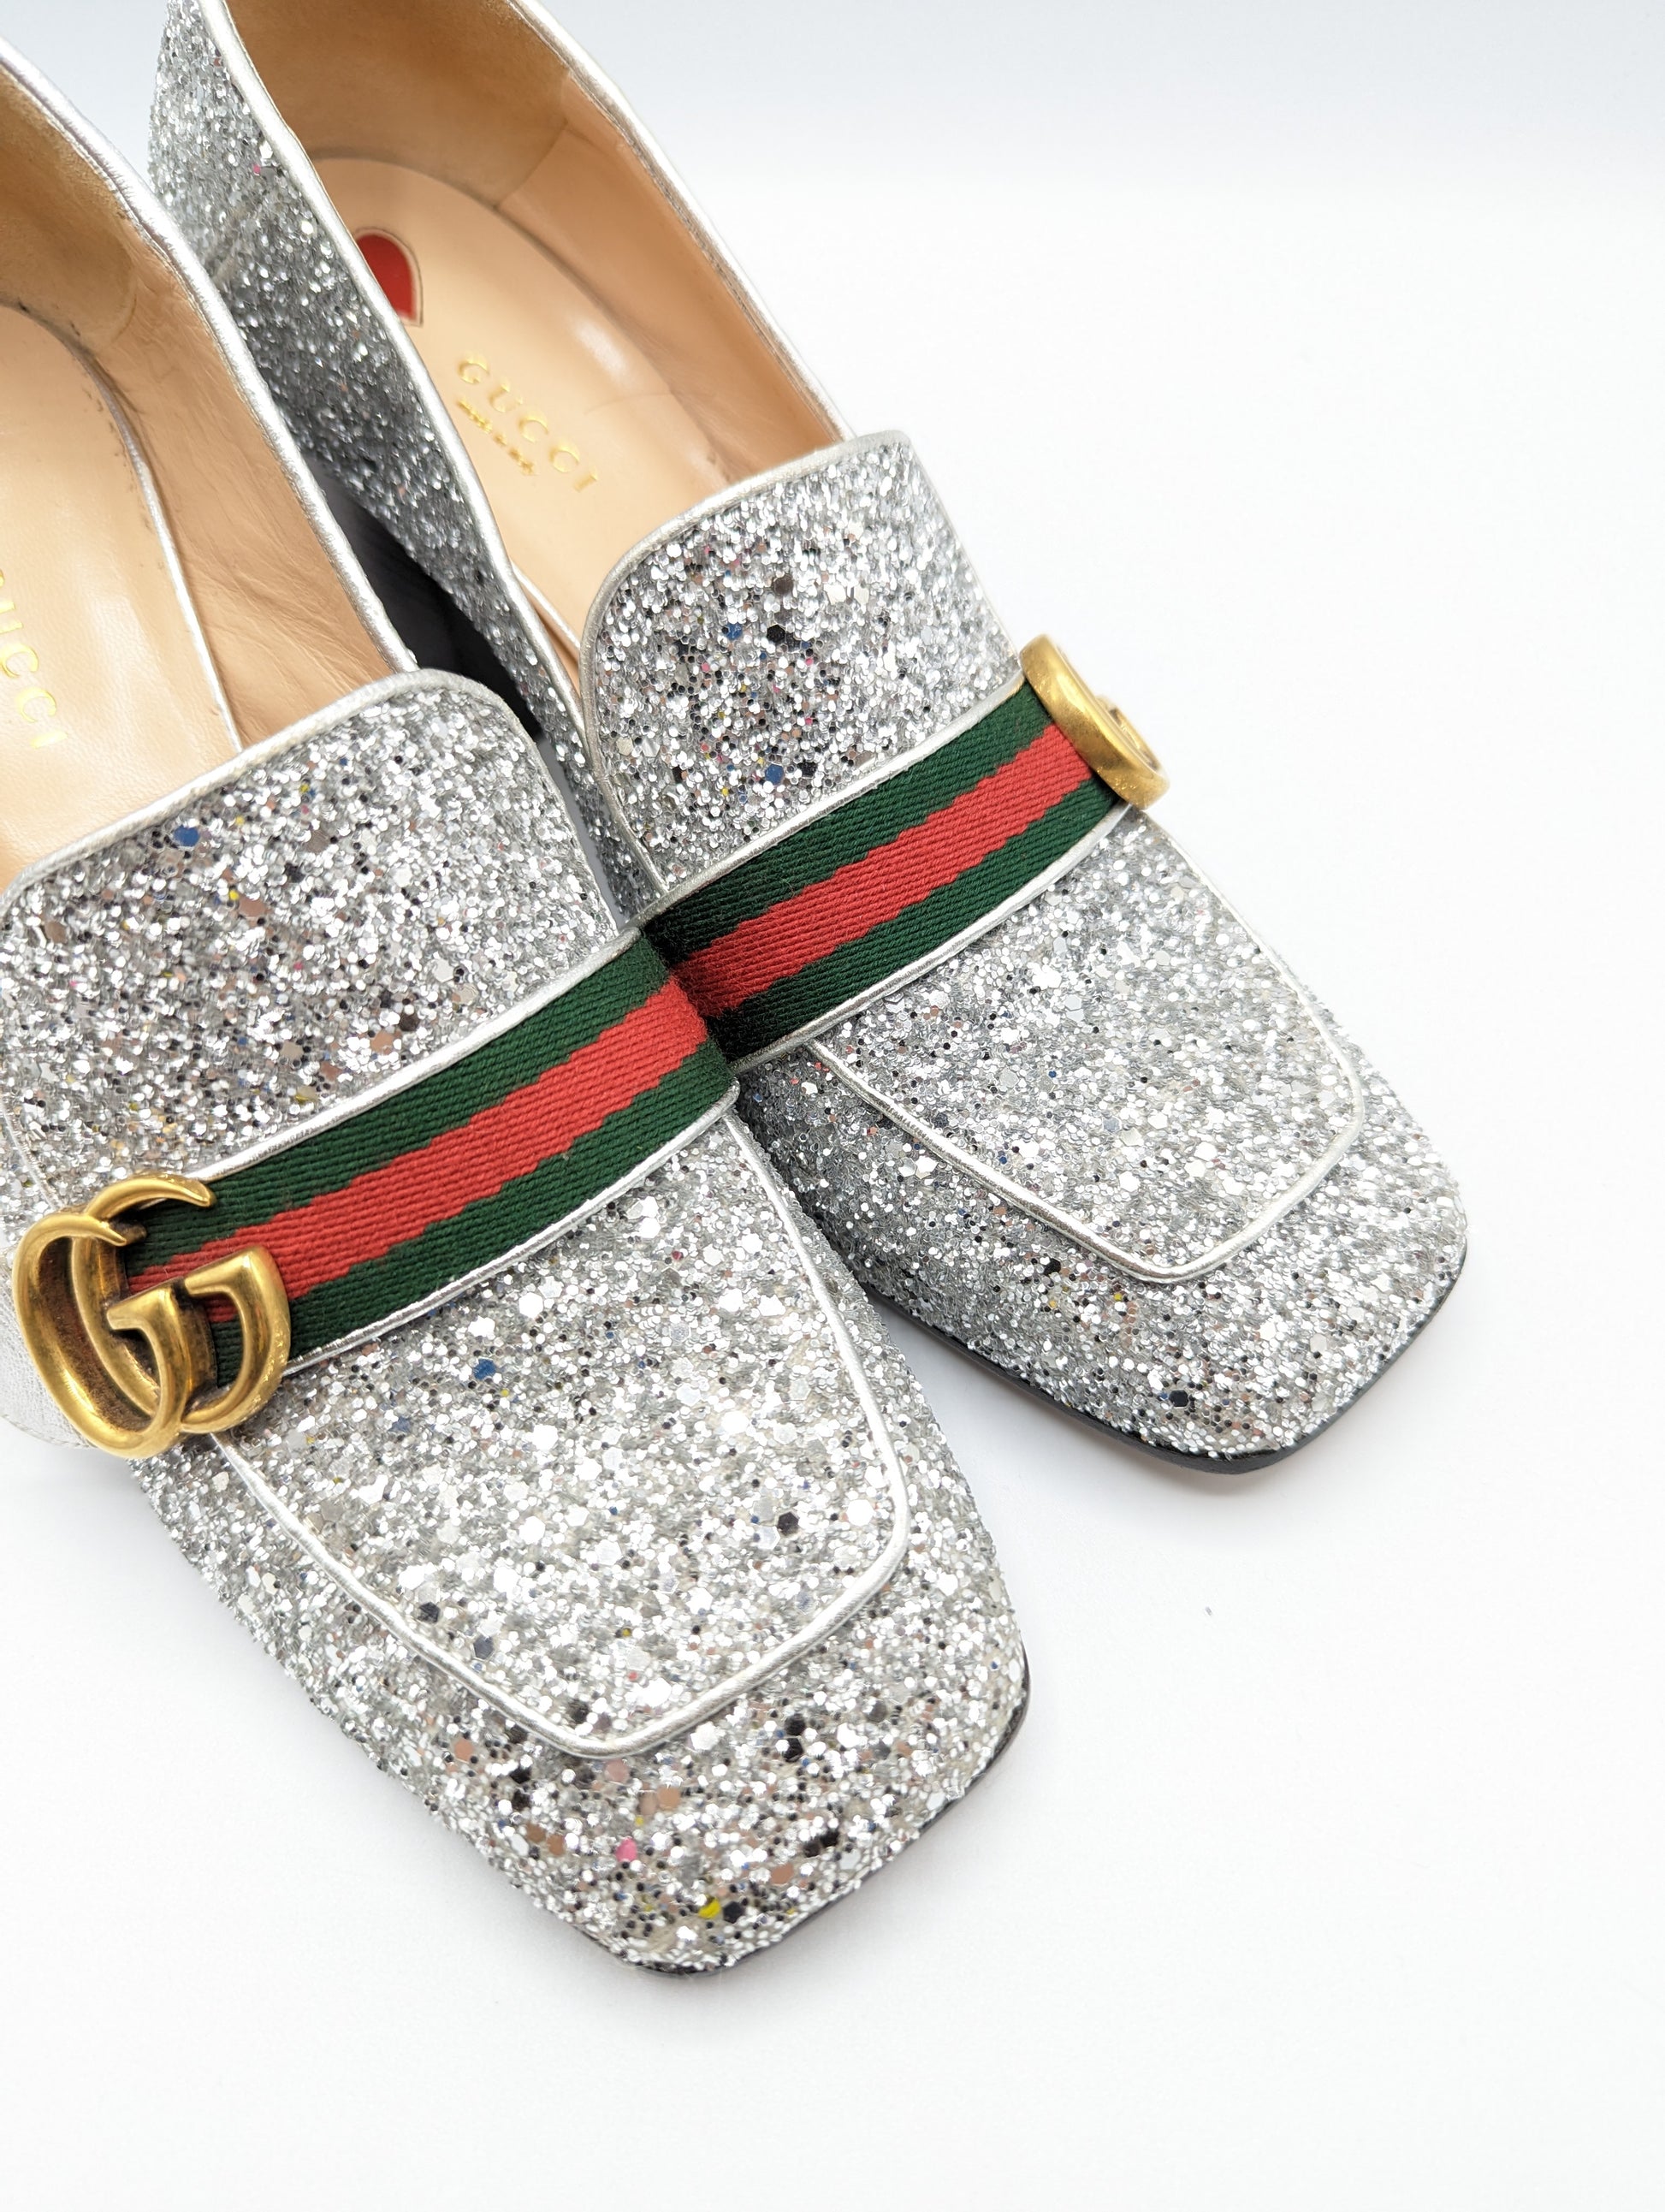 Gucci Authenticated Glitter Heel